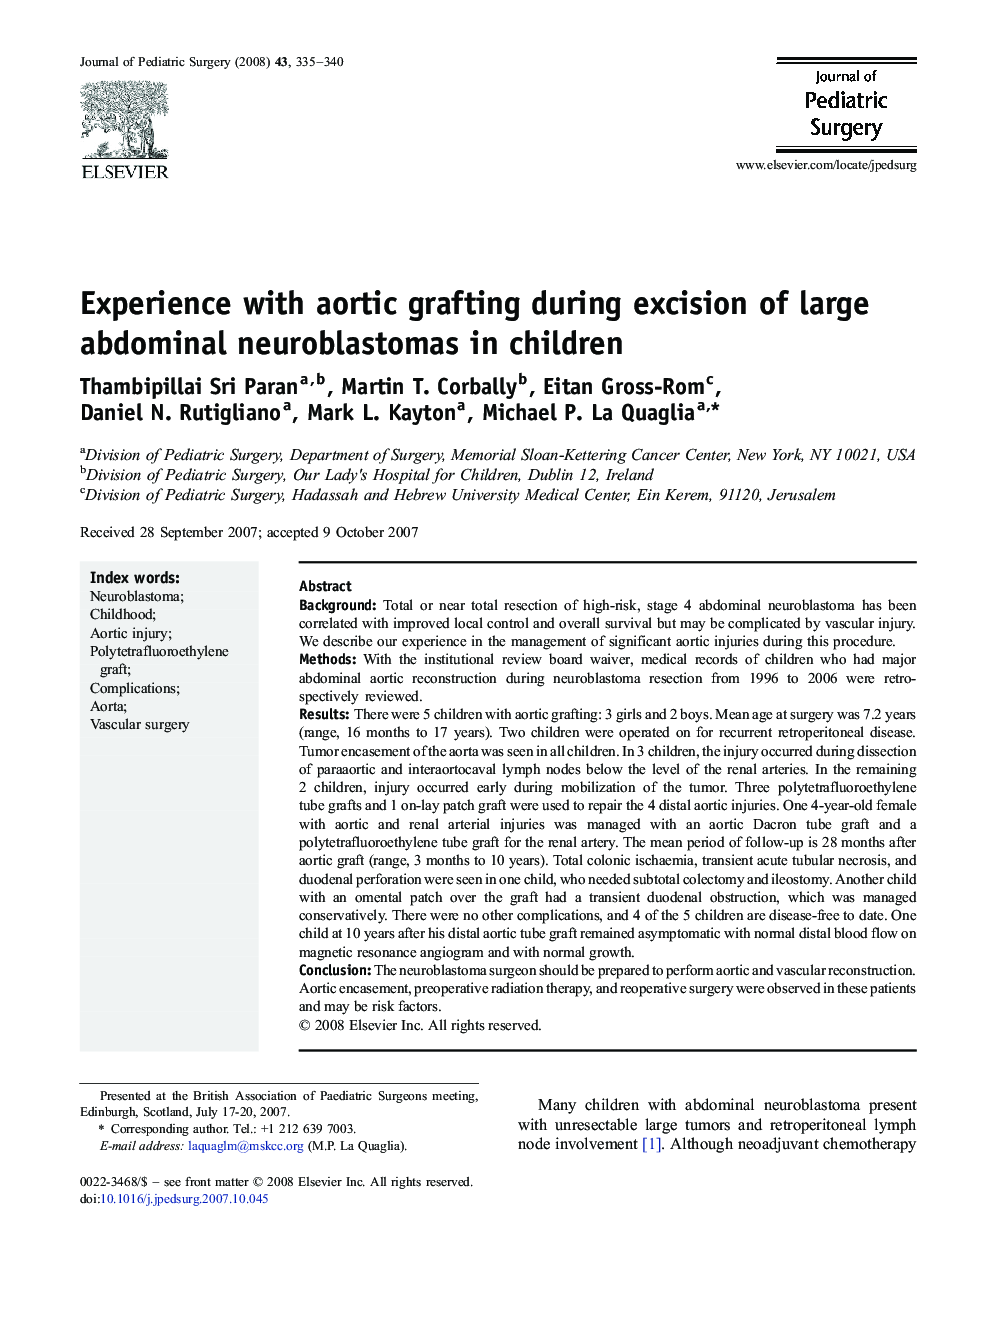 Experience with aortic grafting during excision of large abdominal neuroblastomas in children 